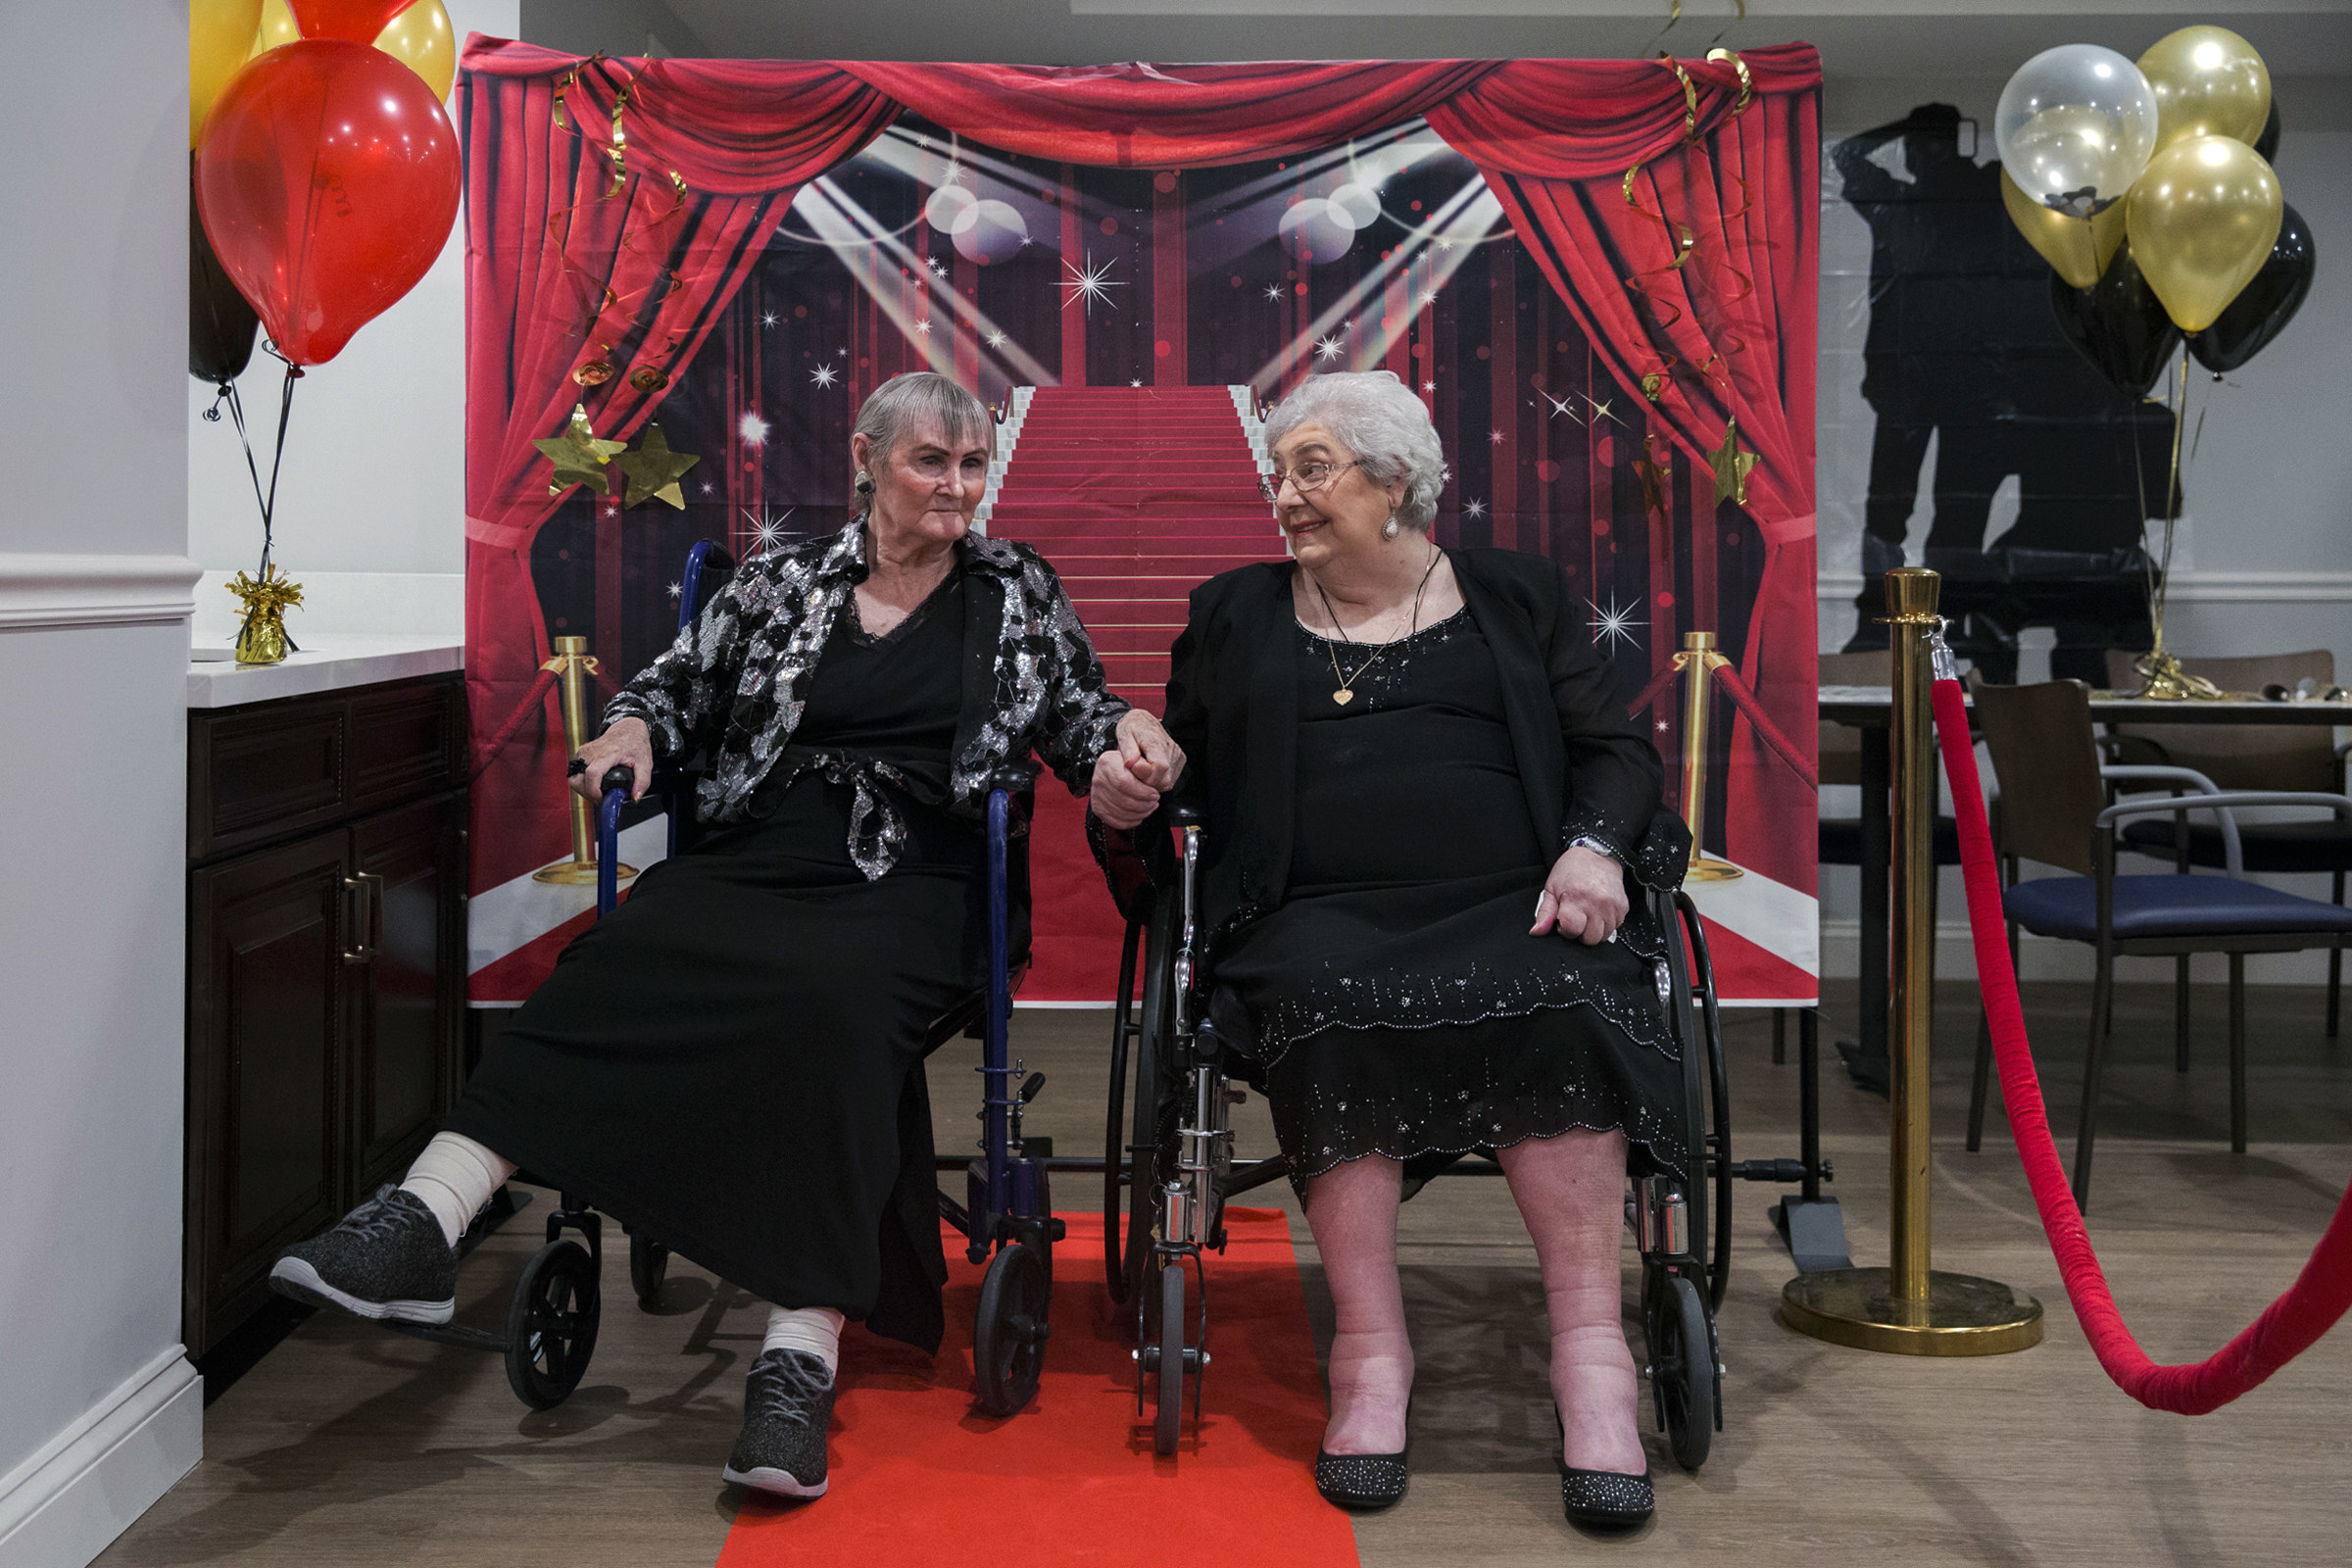 Two older women dressed in black, holding hands while in wheelchairs in front of a red carpet backdrop 